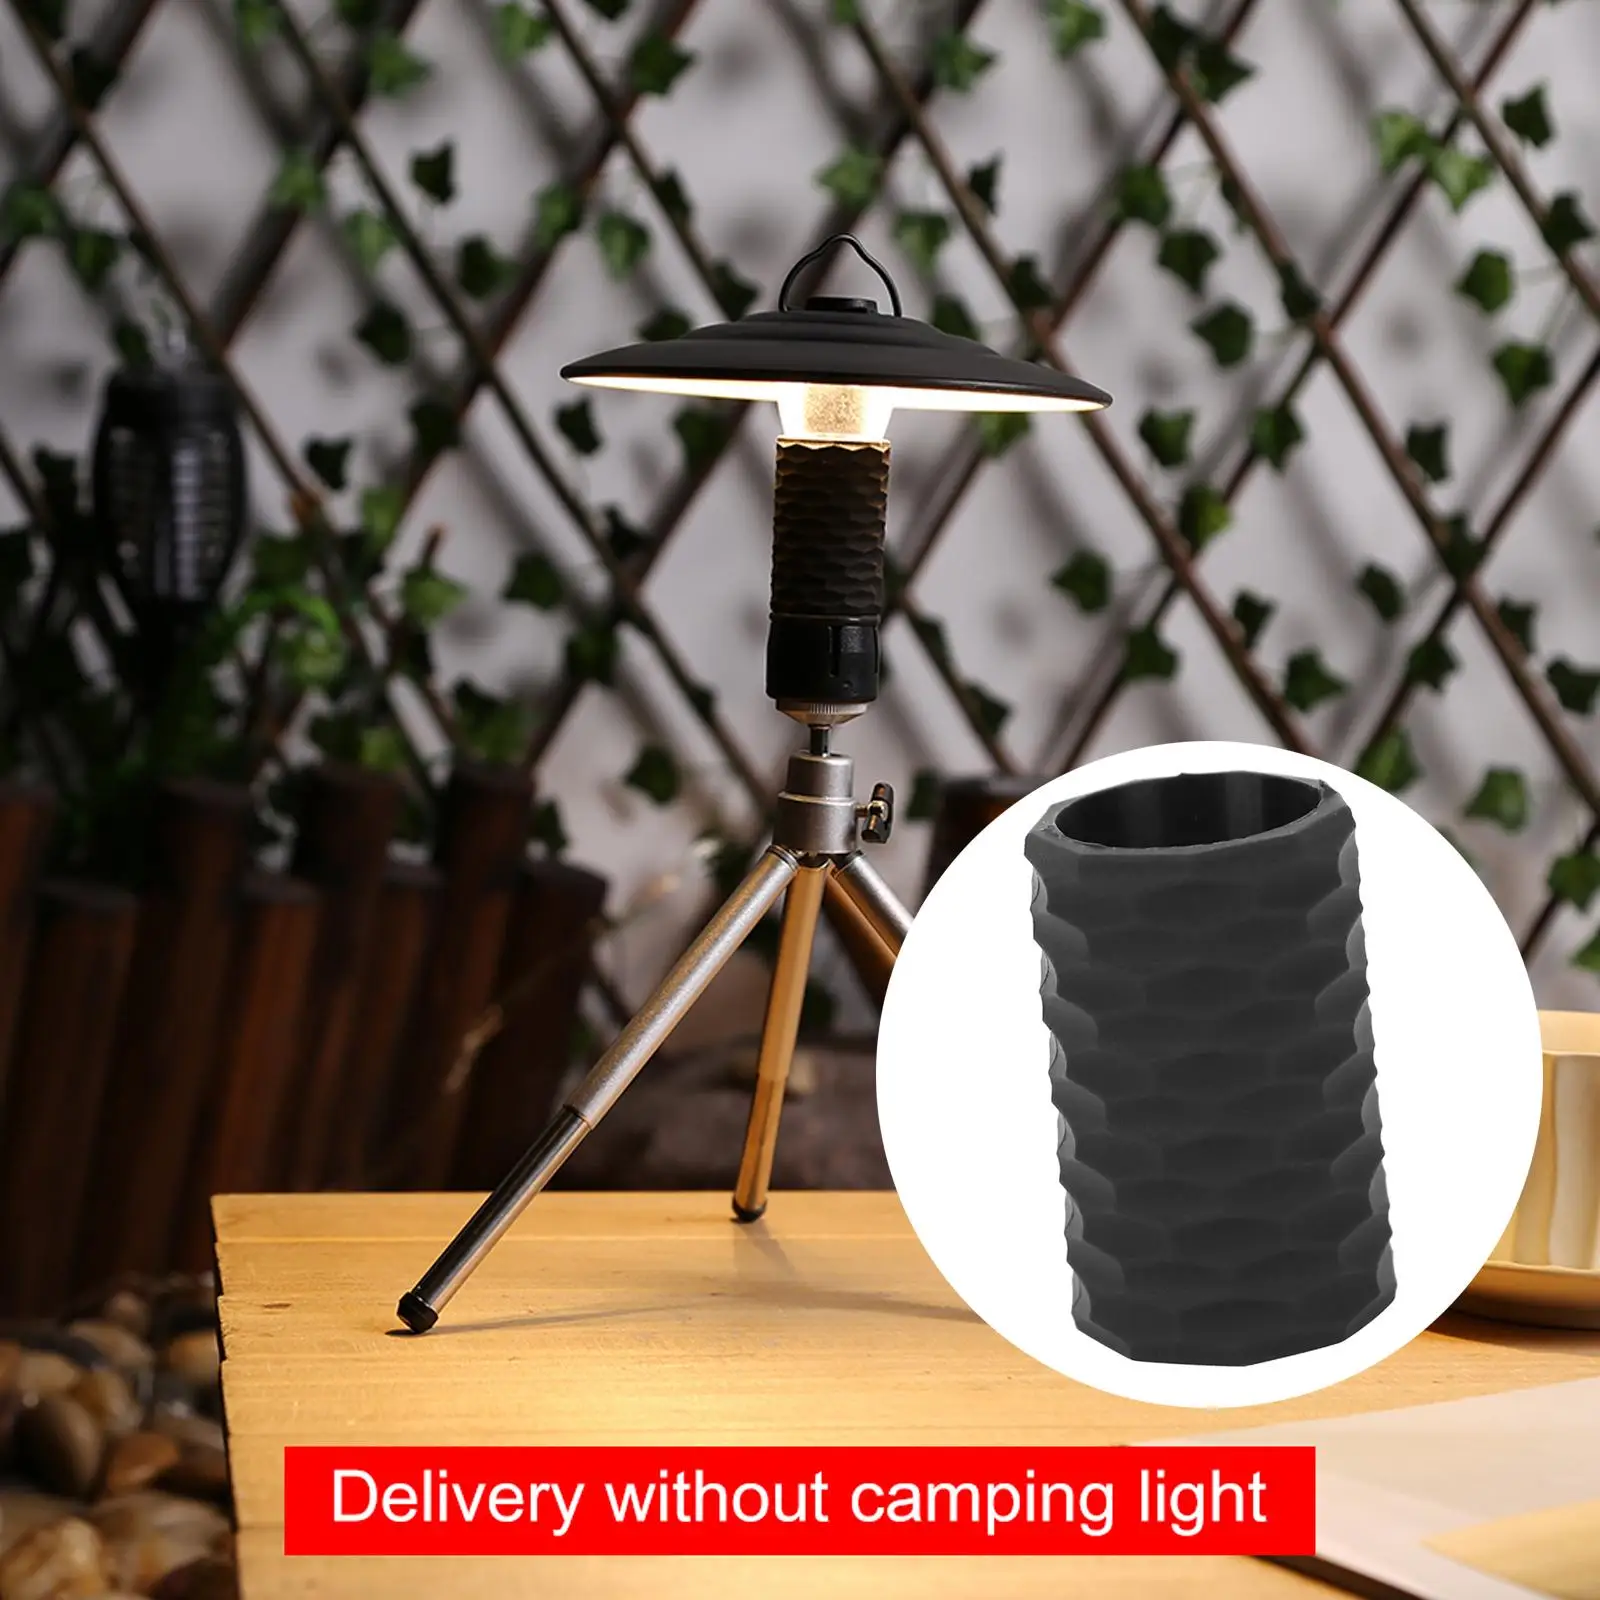 Lantern Lampshade Camping Lights Cover Flashlight Sleeves Nonslip Silicone Tube Outdoor for Torch Hiking Backpacking Accessories